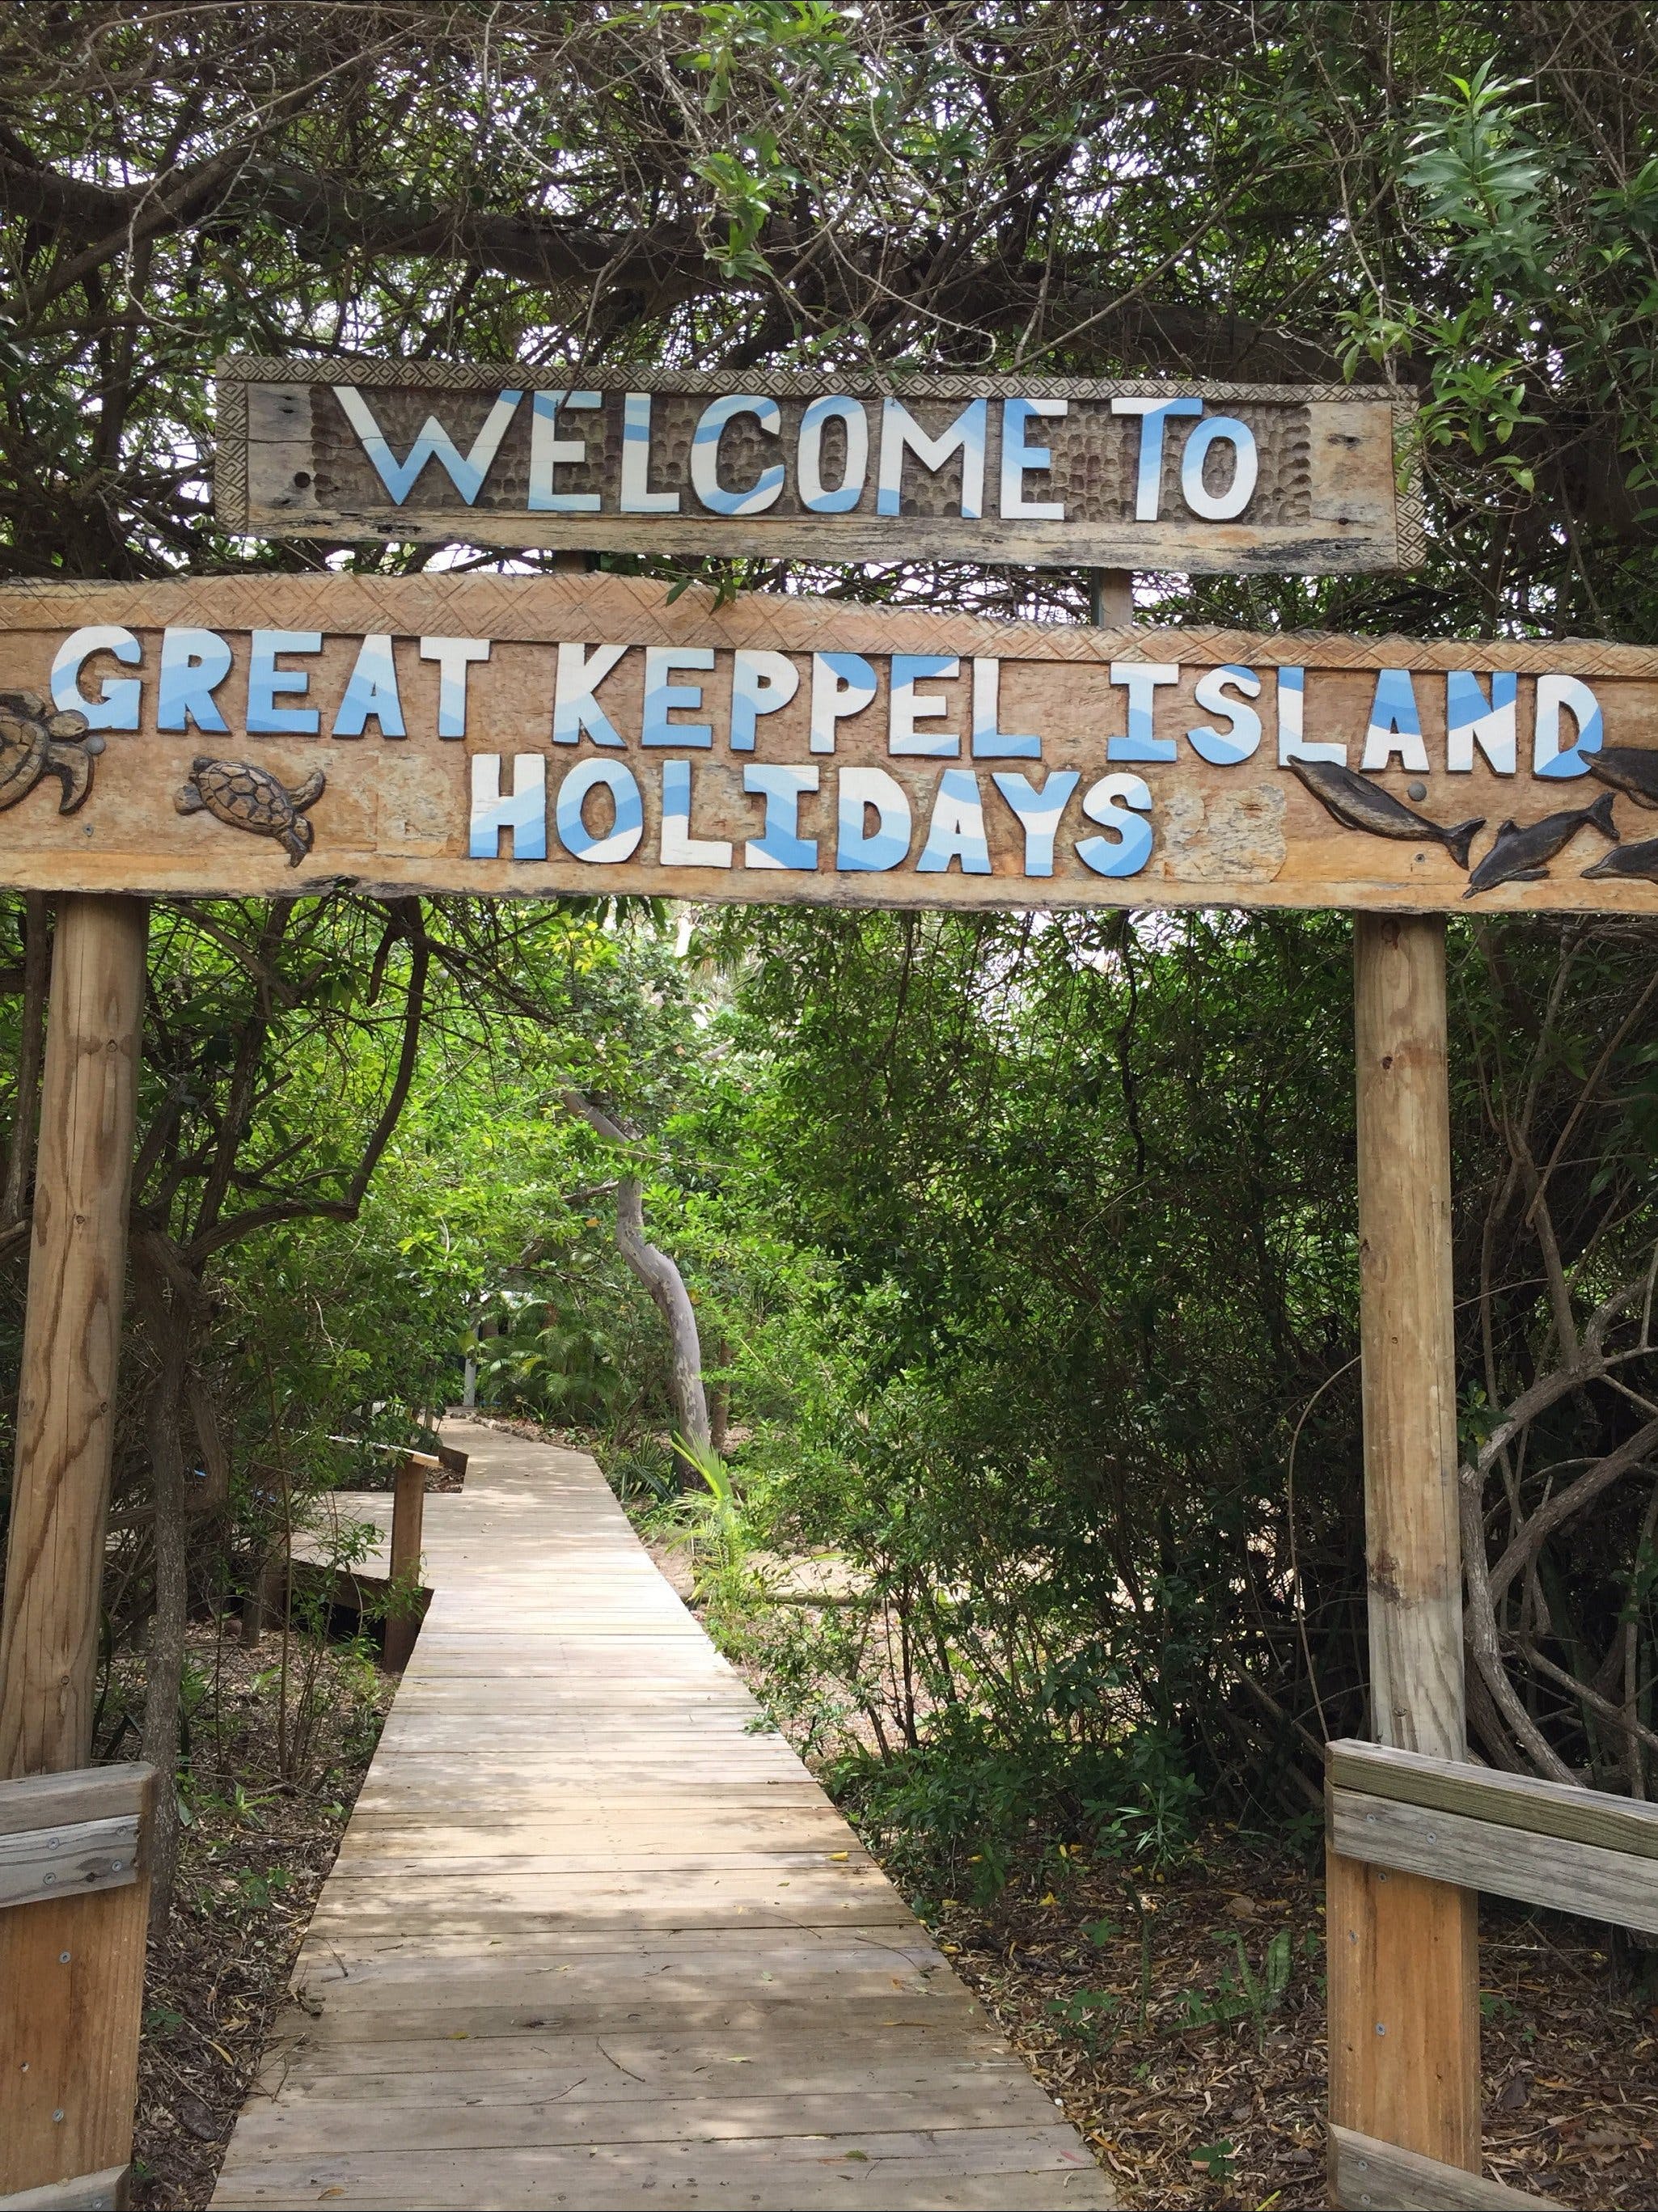 Great Keppel Island Holiday Village - Accommodation in Surfers Paradise